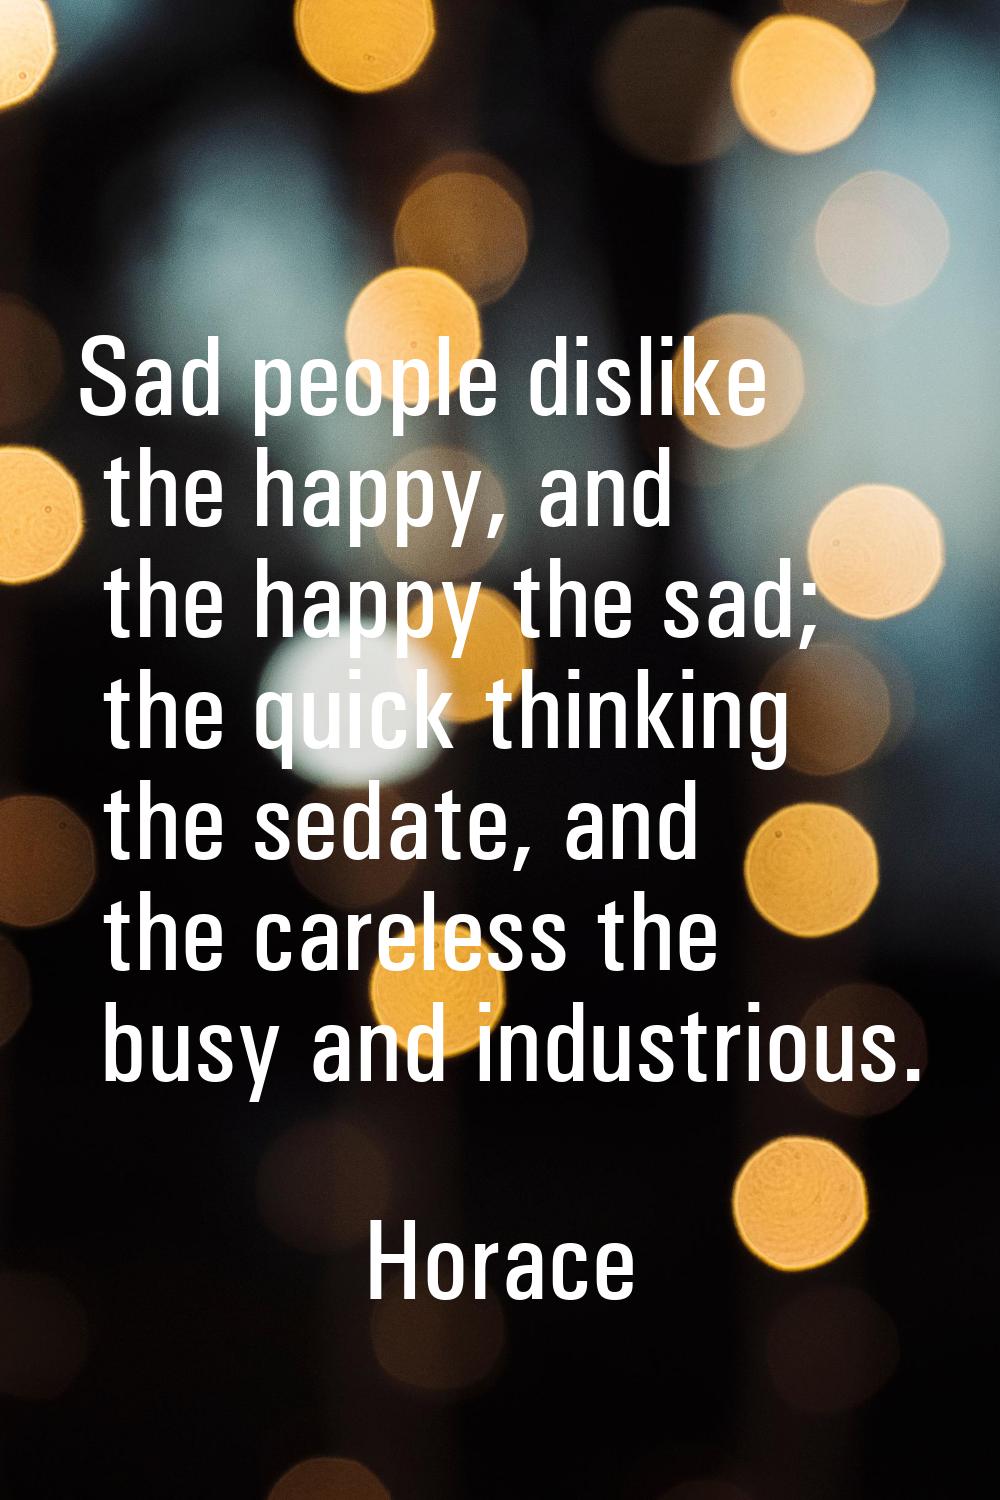 Sad people dislike the happy, and the happy the sad; the quick thinking the sedate, and the careles